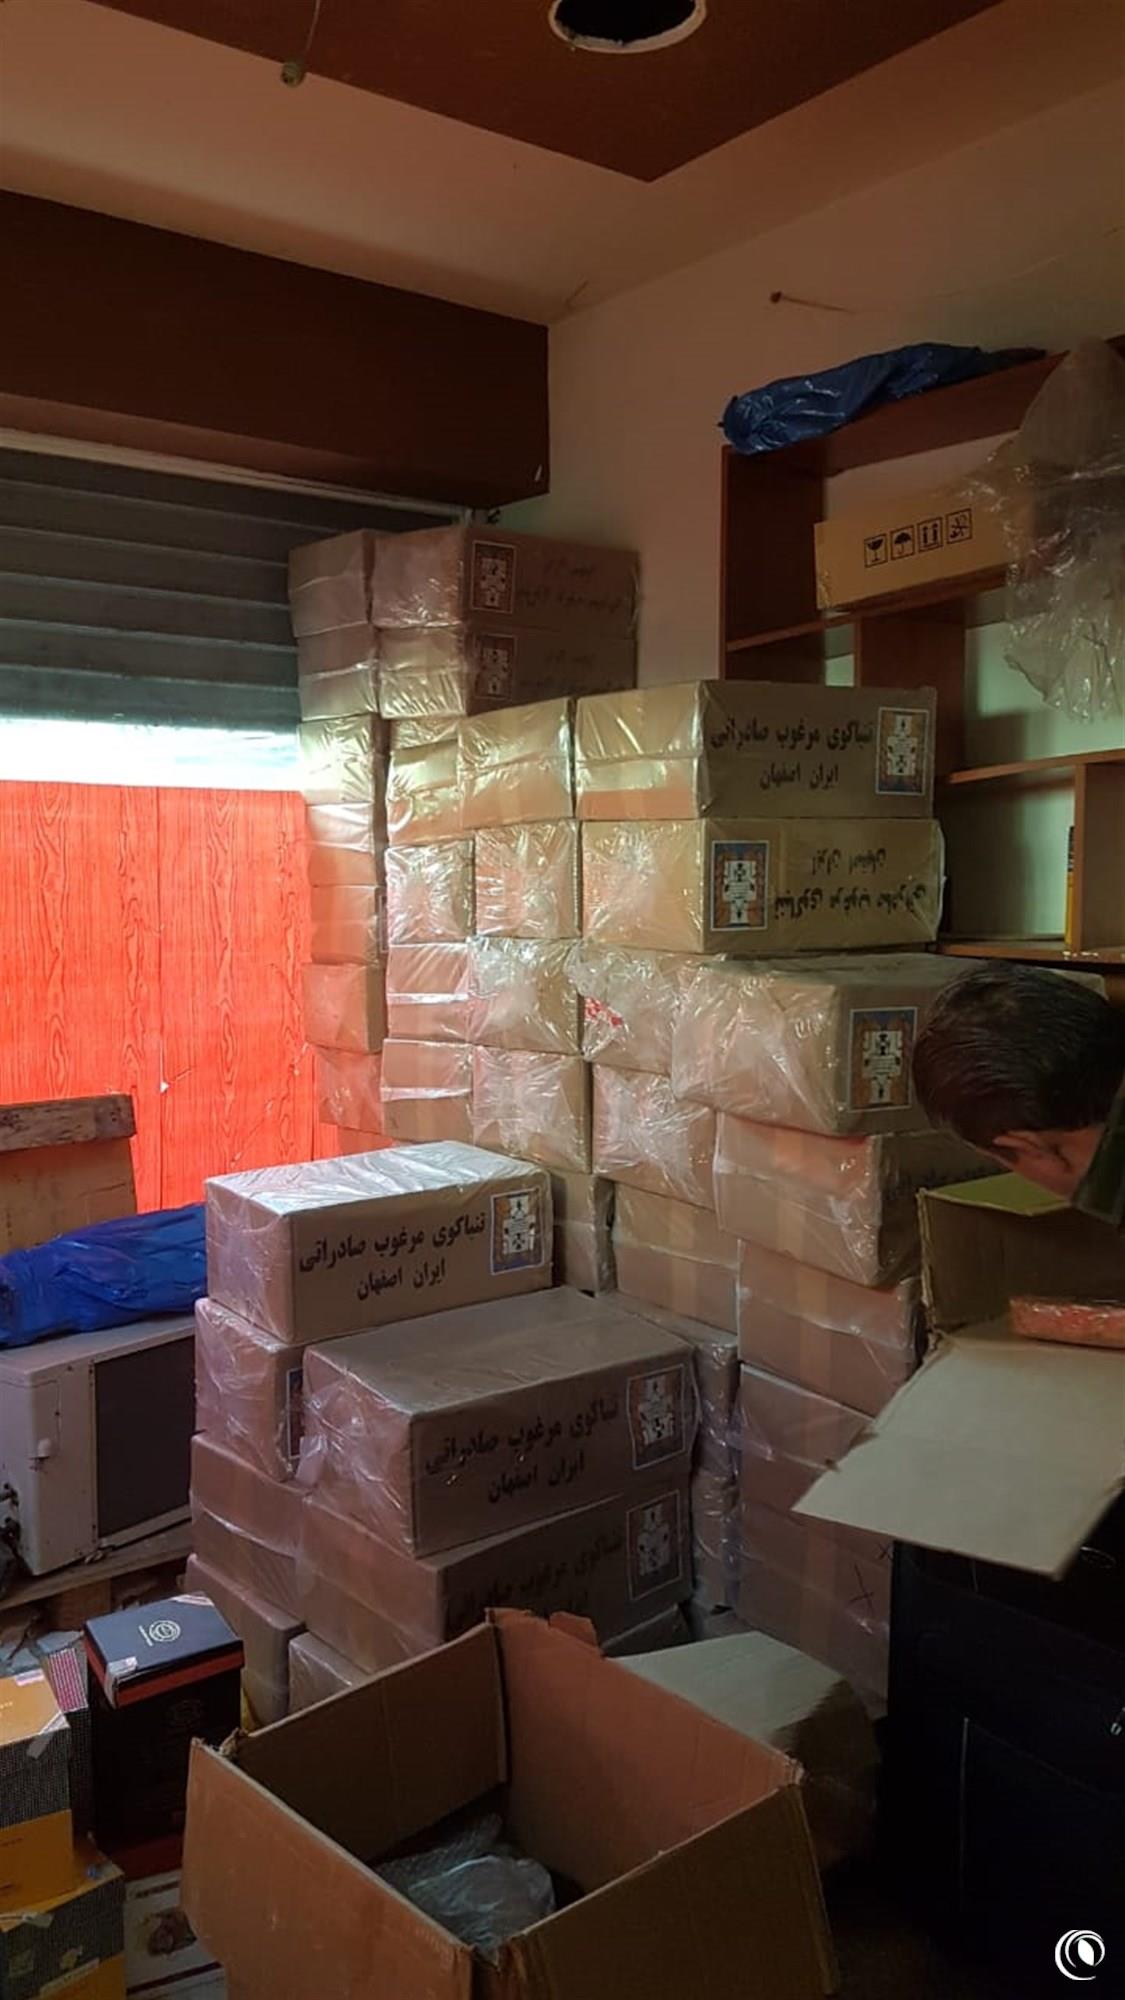 Regie announces start of tobacco purchase from South Lebanon; confiscates smuggled products from Dahyeh